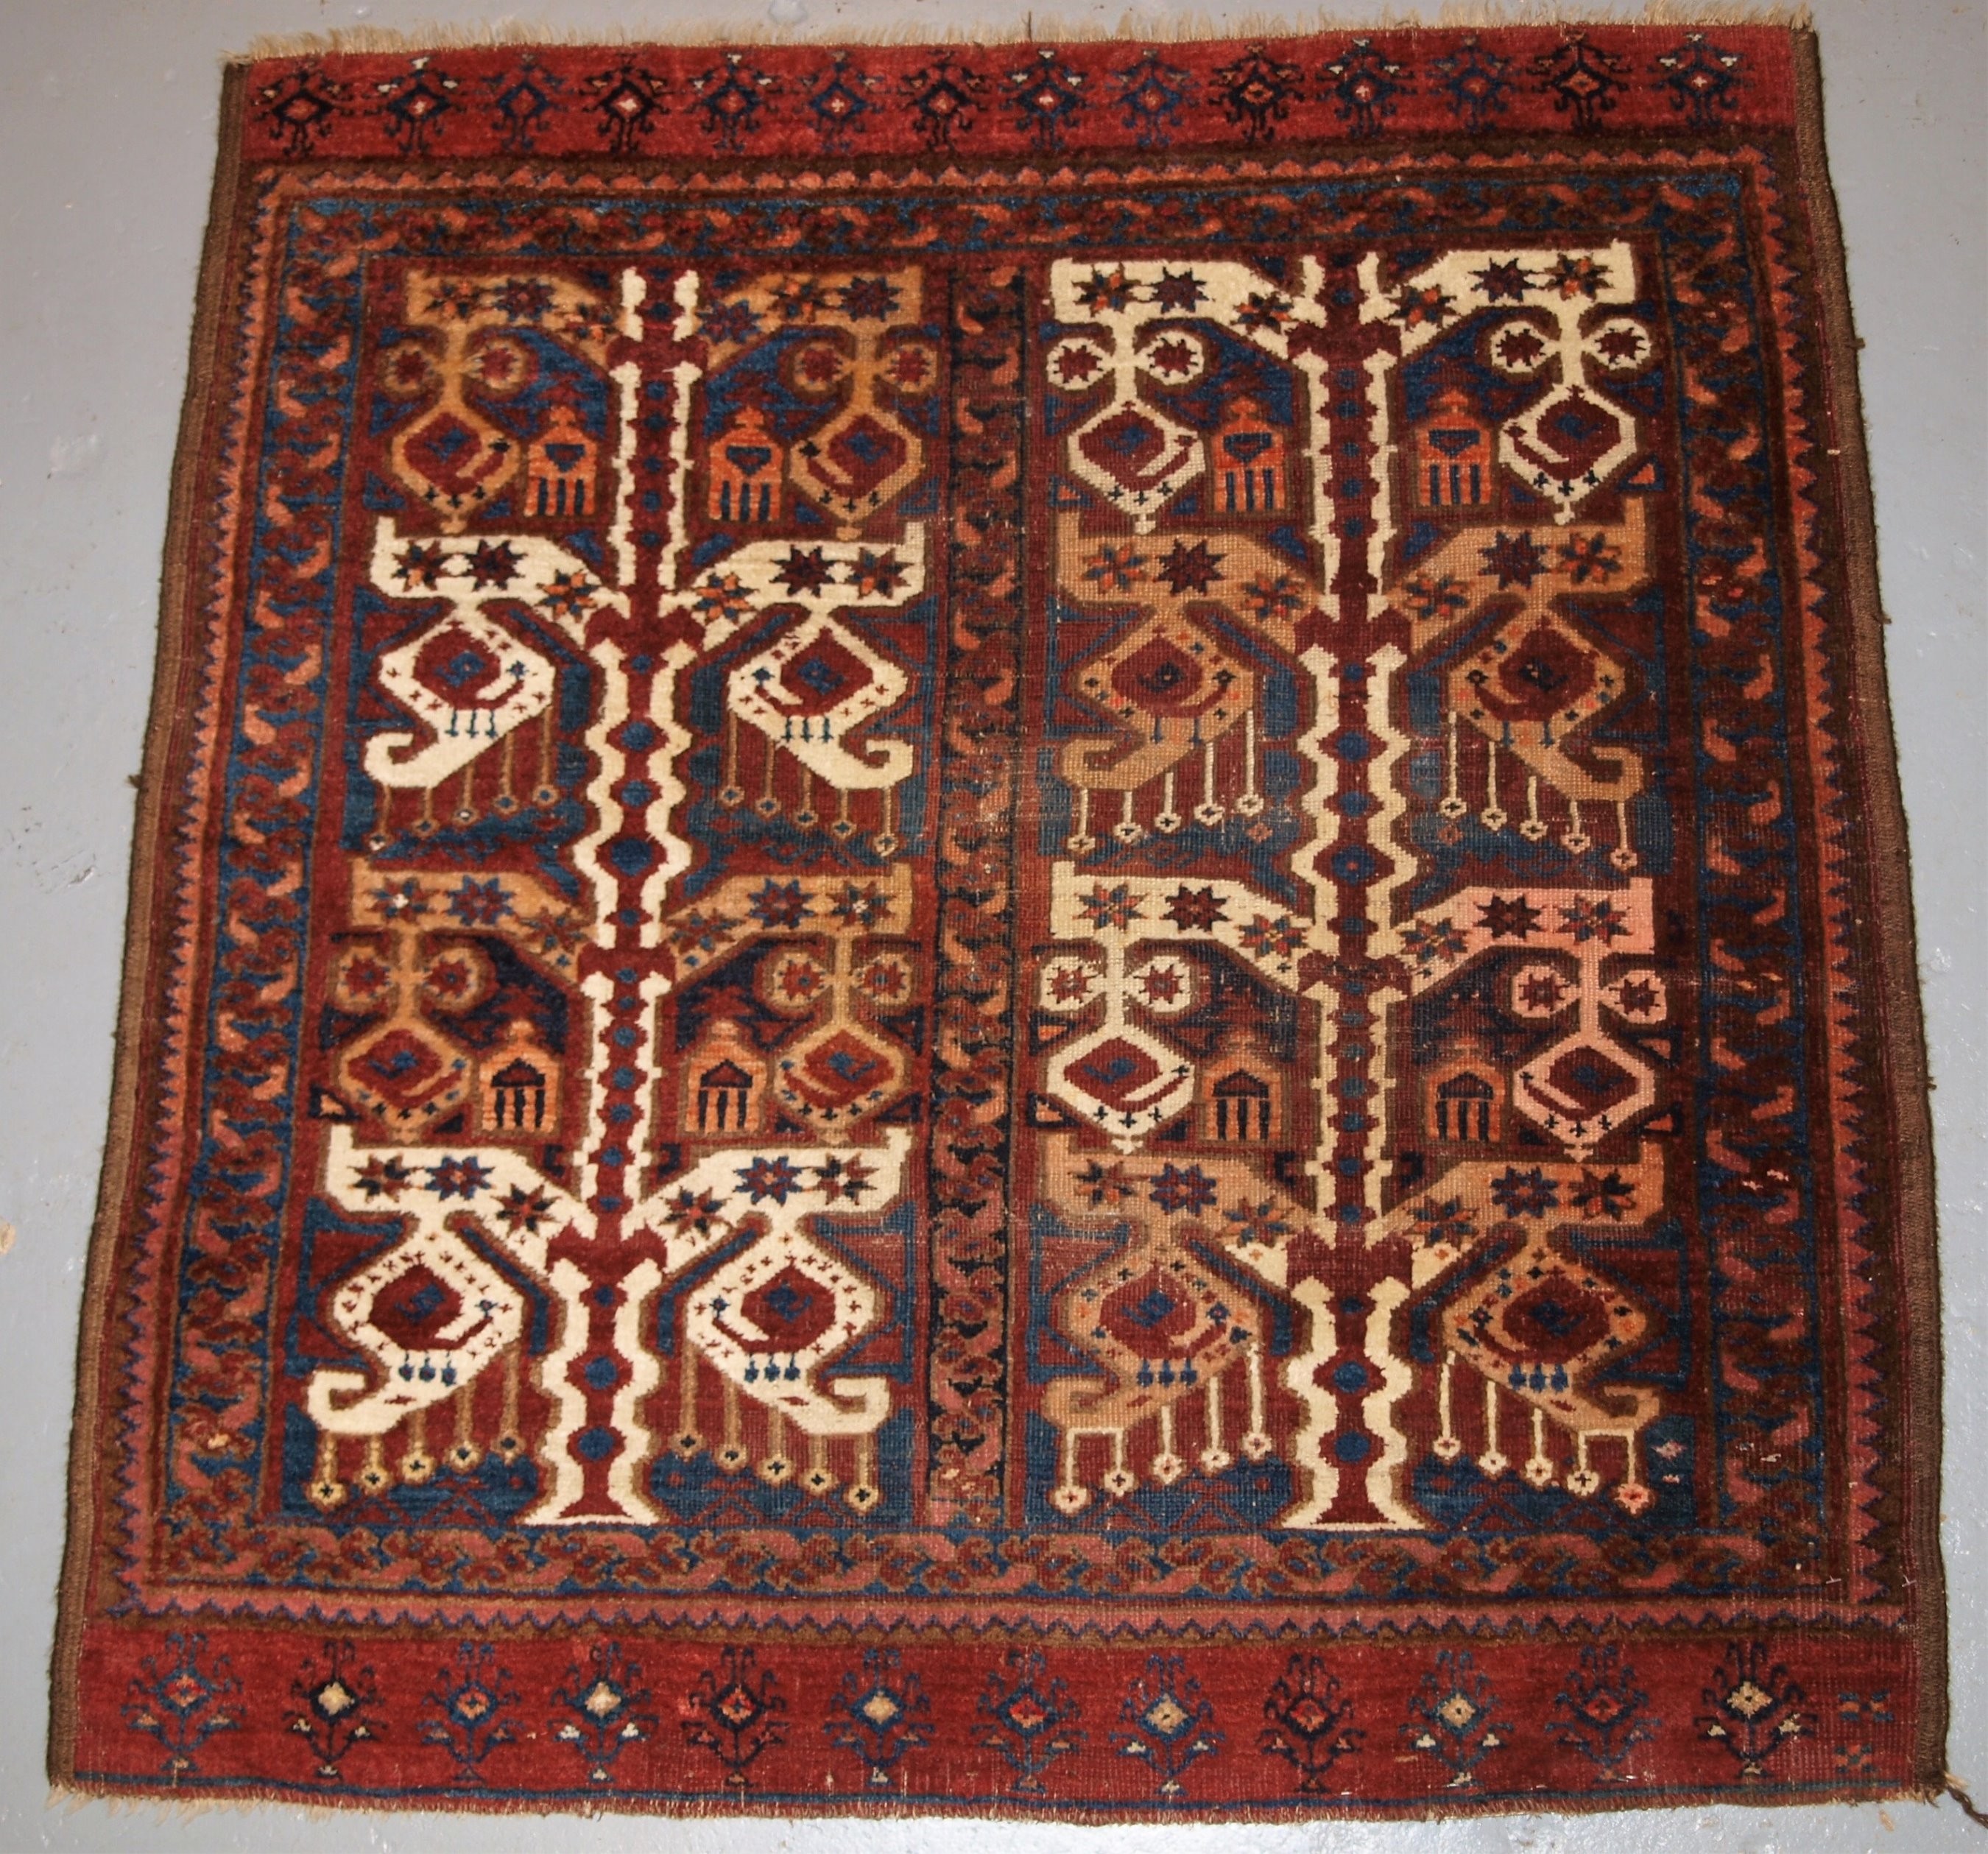 rare beshir turkmen dowry rug with ikat design now in stock